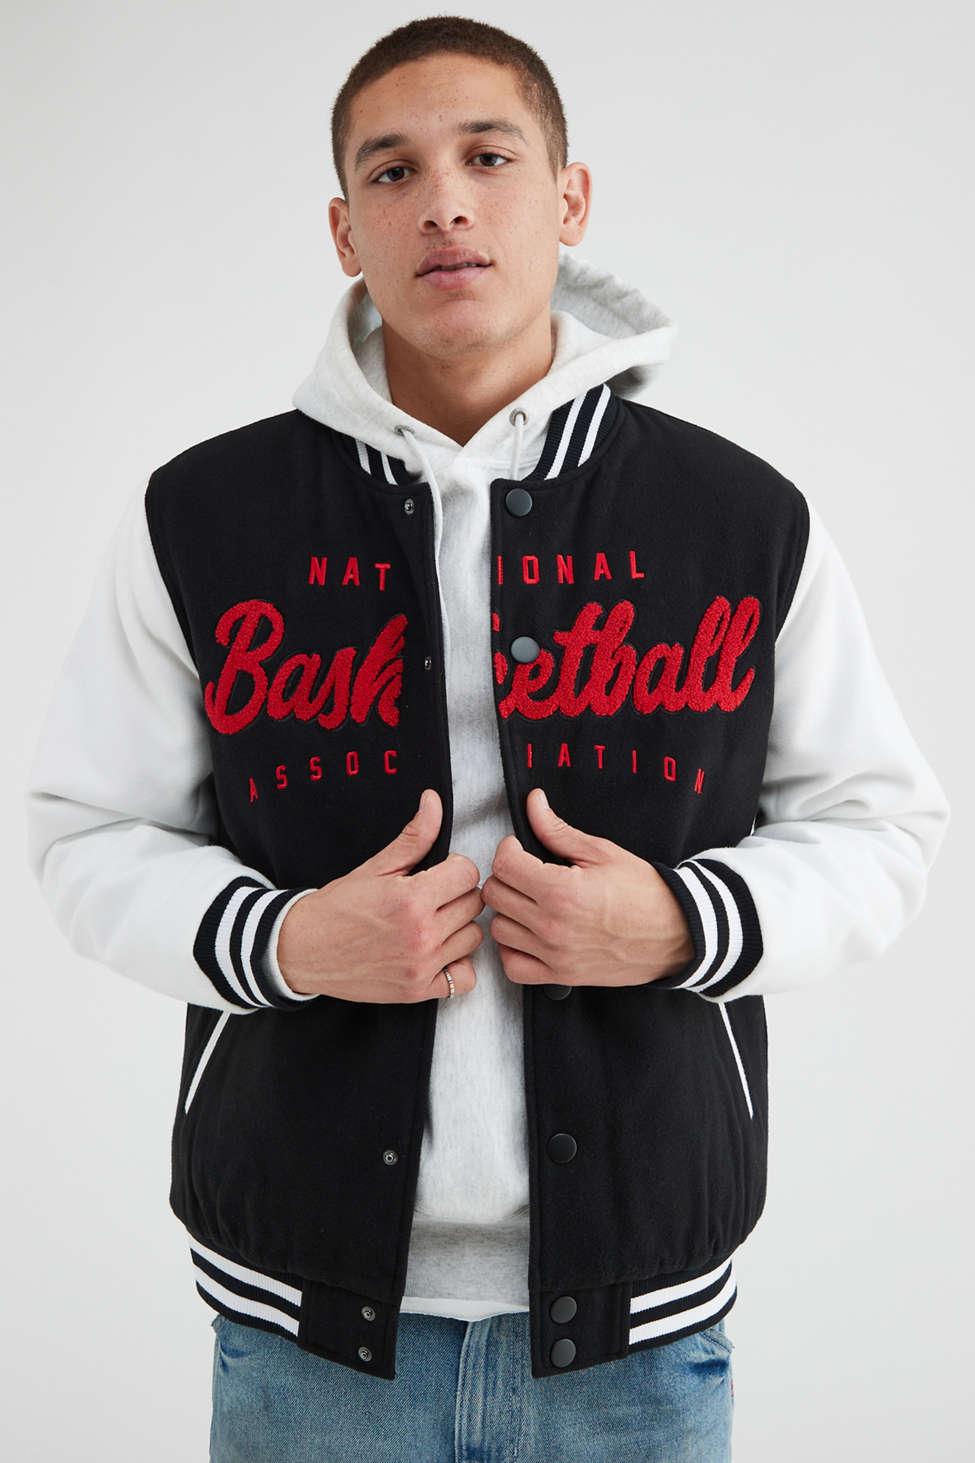 Brooklyn Cloth Ultra Game Uo Exclusive Nba Varsity Jacket for Men